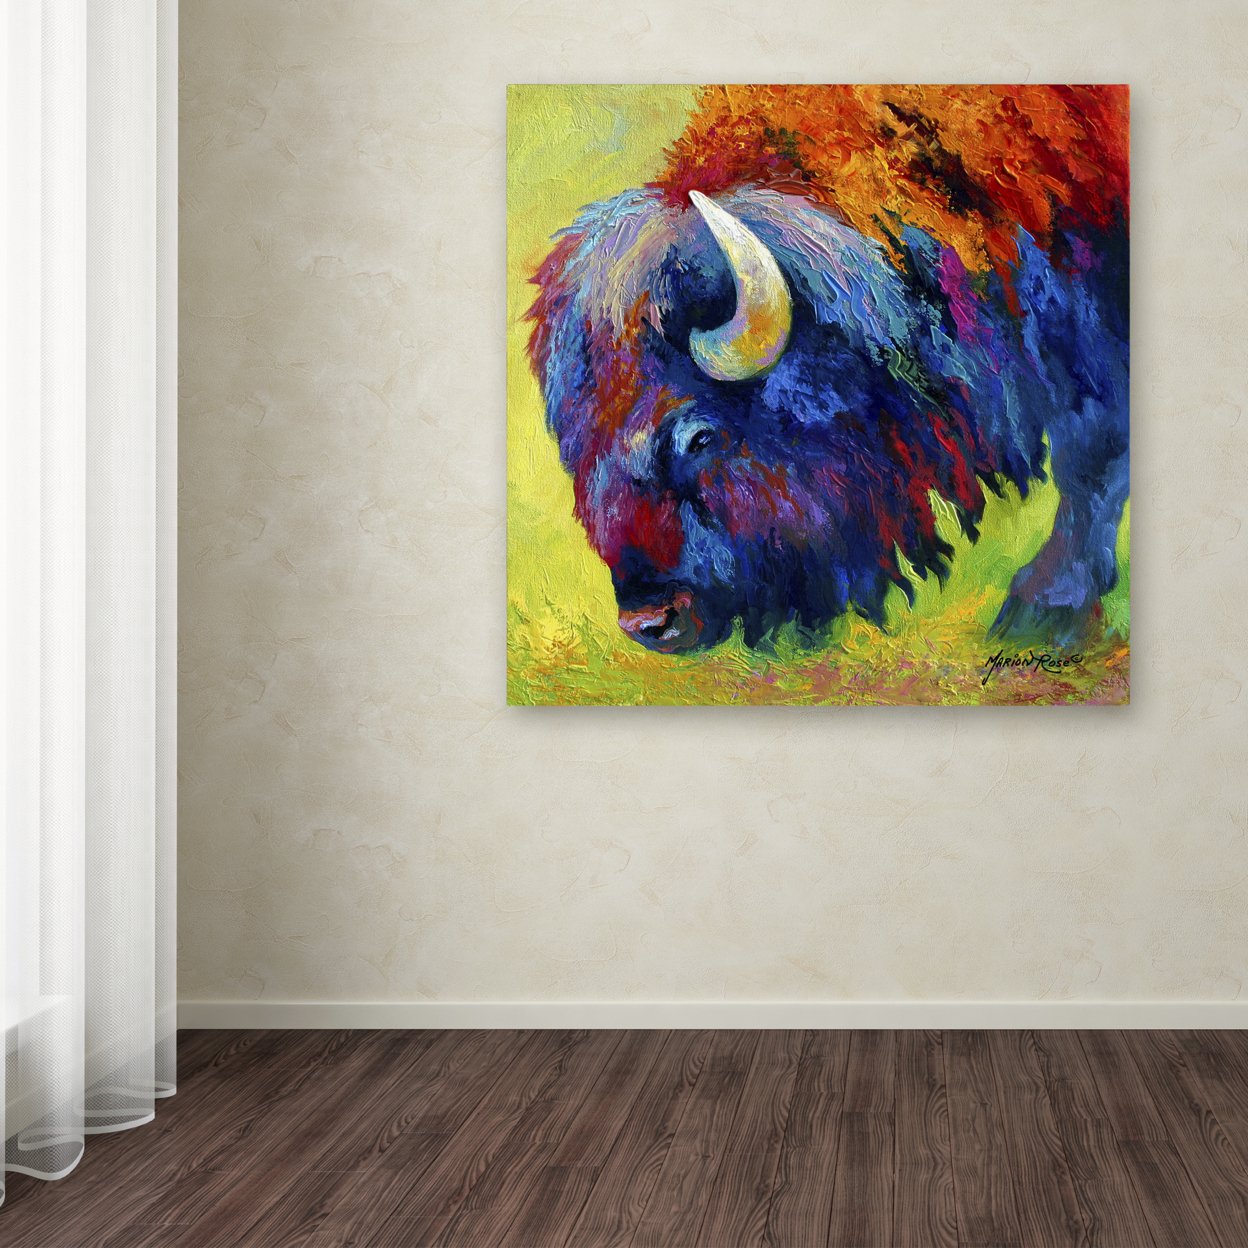 Marion Rose 'Bison Portrait II' Ready To Hang Canvas Art 35 X 35 Inches Made In USA